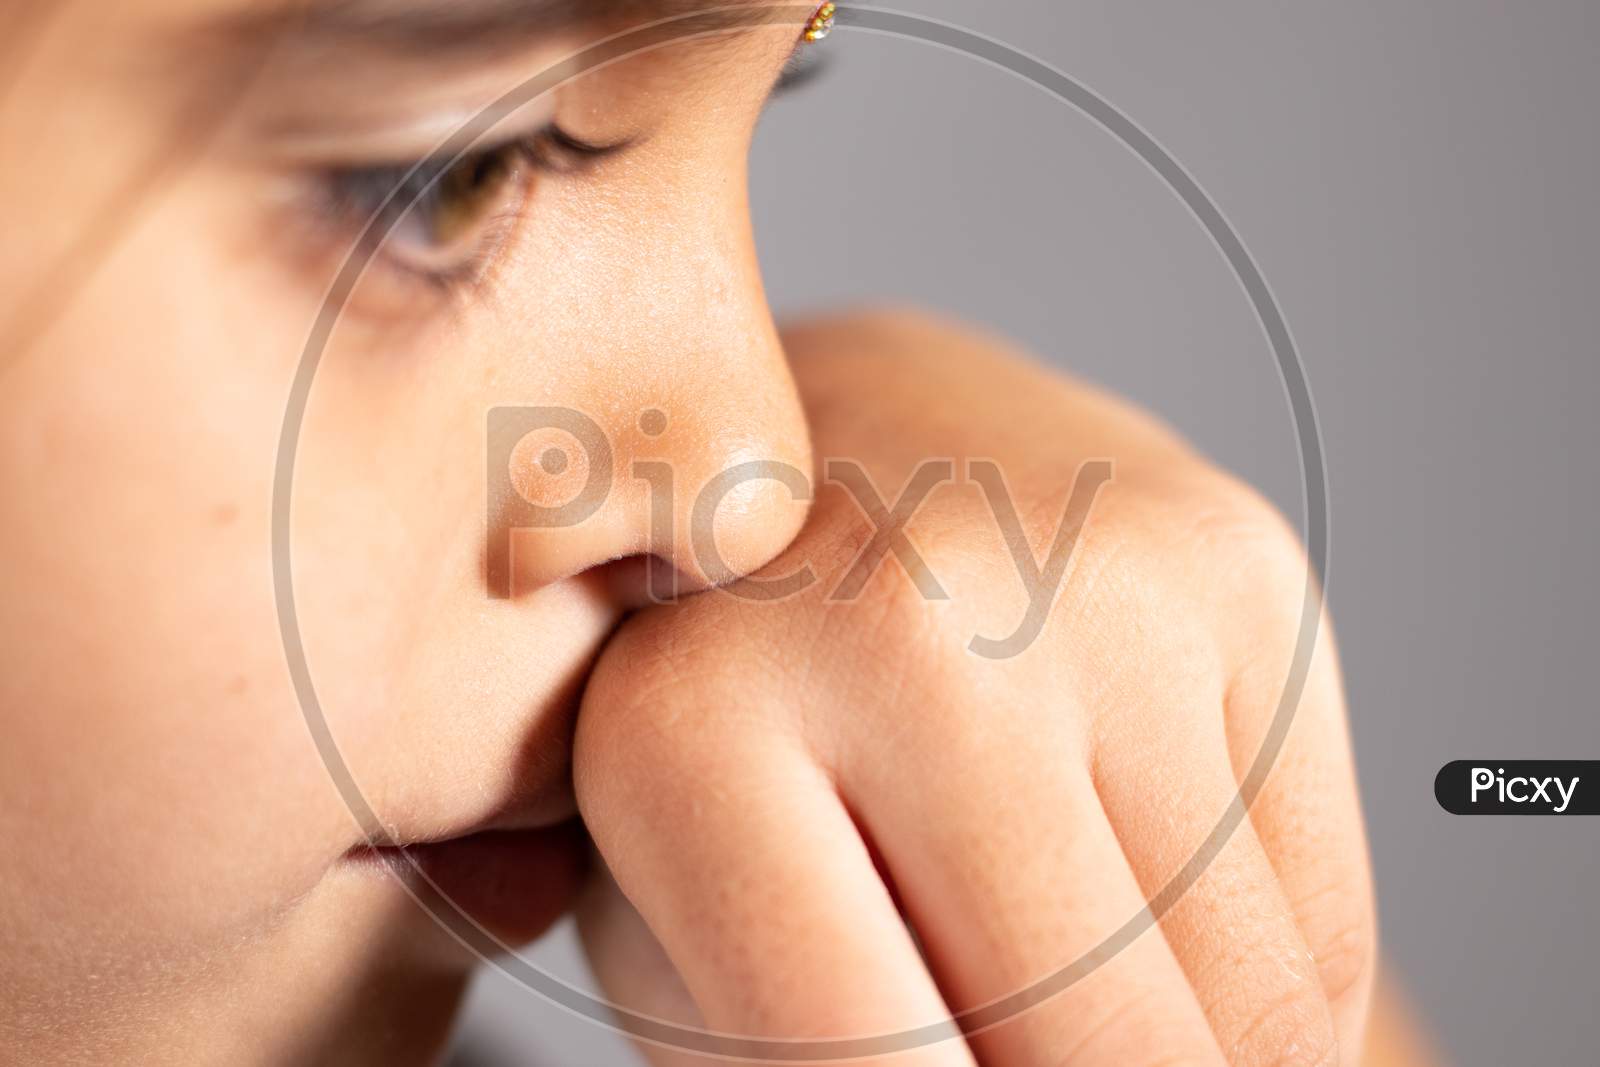 Extreme Close Up Of Child Touch'S Her Nose - Concept Showing To Prevent And Avoid Touching Your Nose. Protect From Covid-19 Or Coronavirus Spreading Or Outbreak - Don T Touch Your Nose.